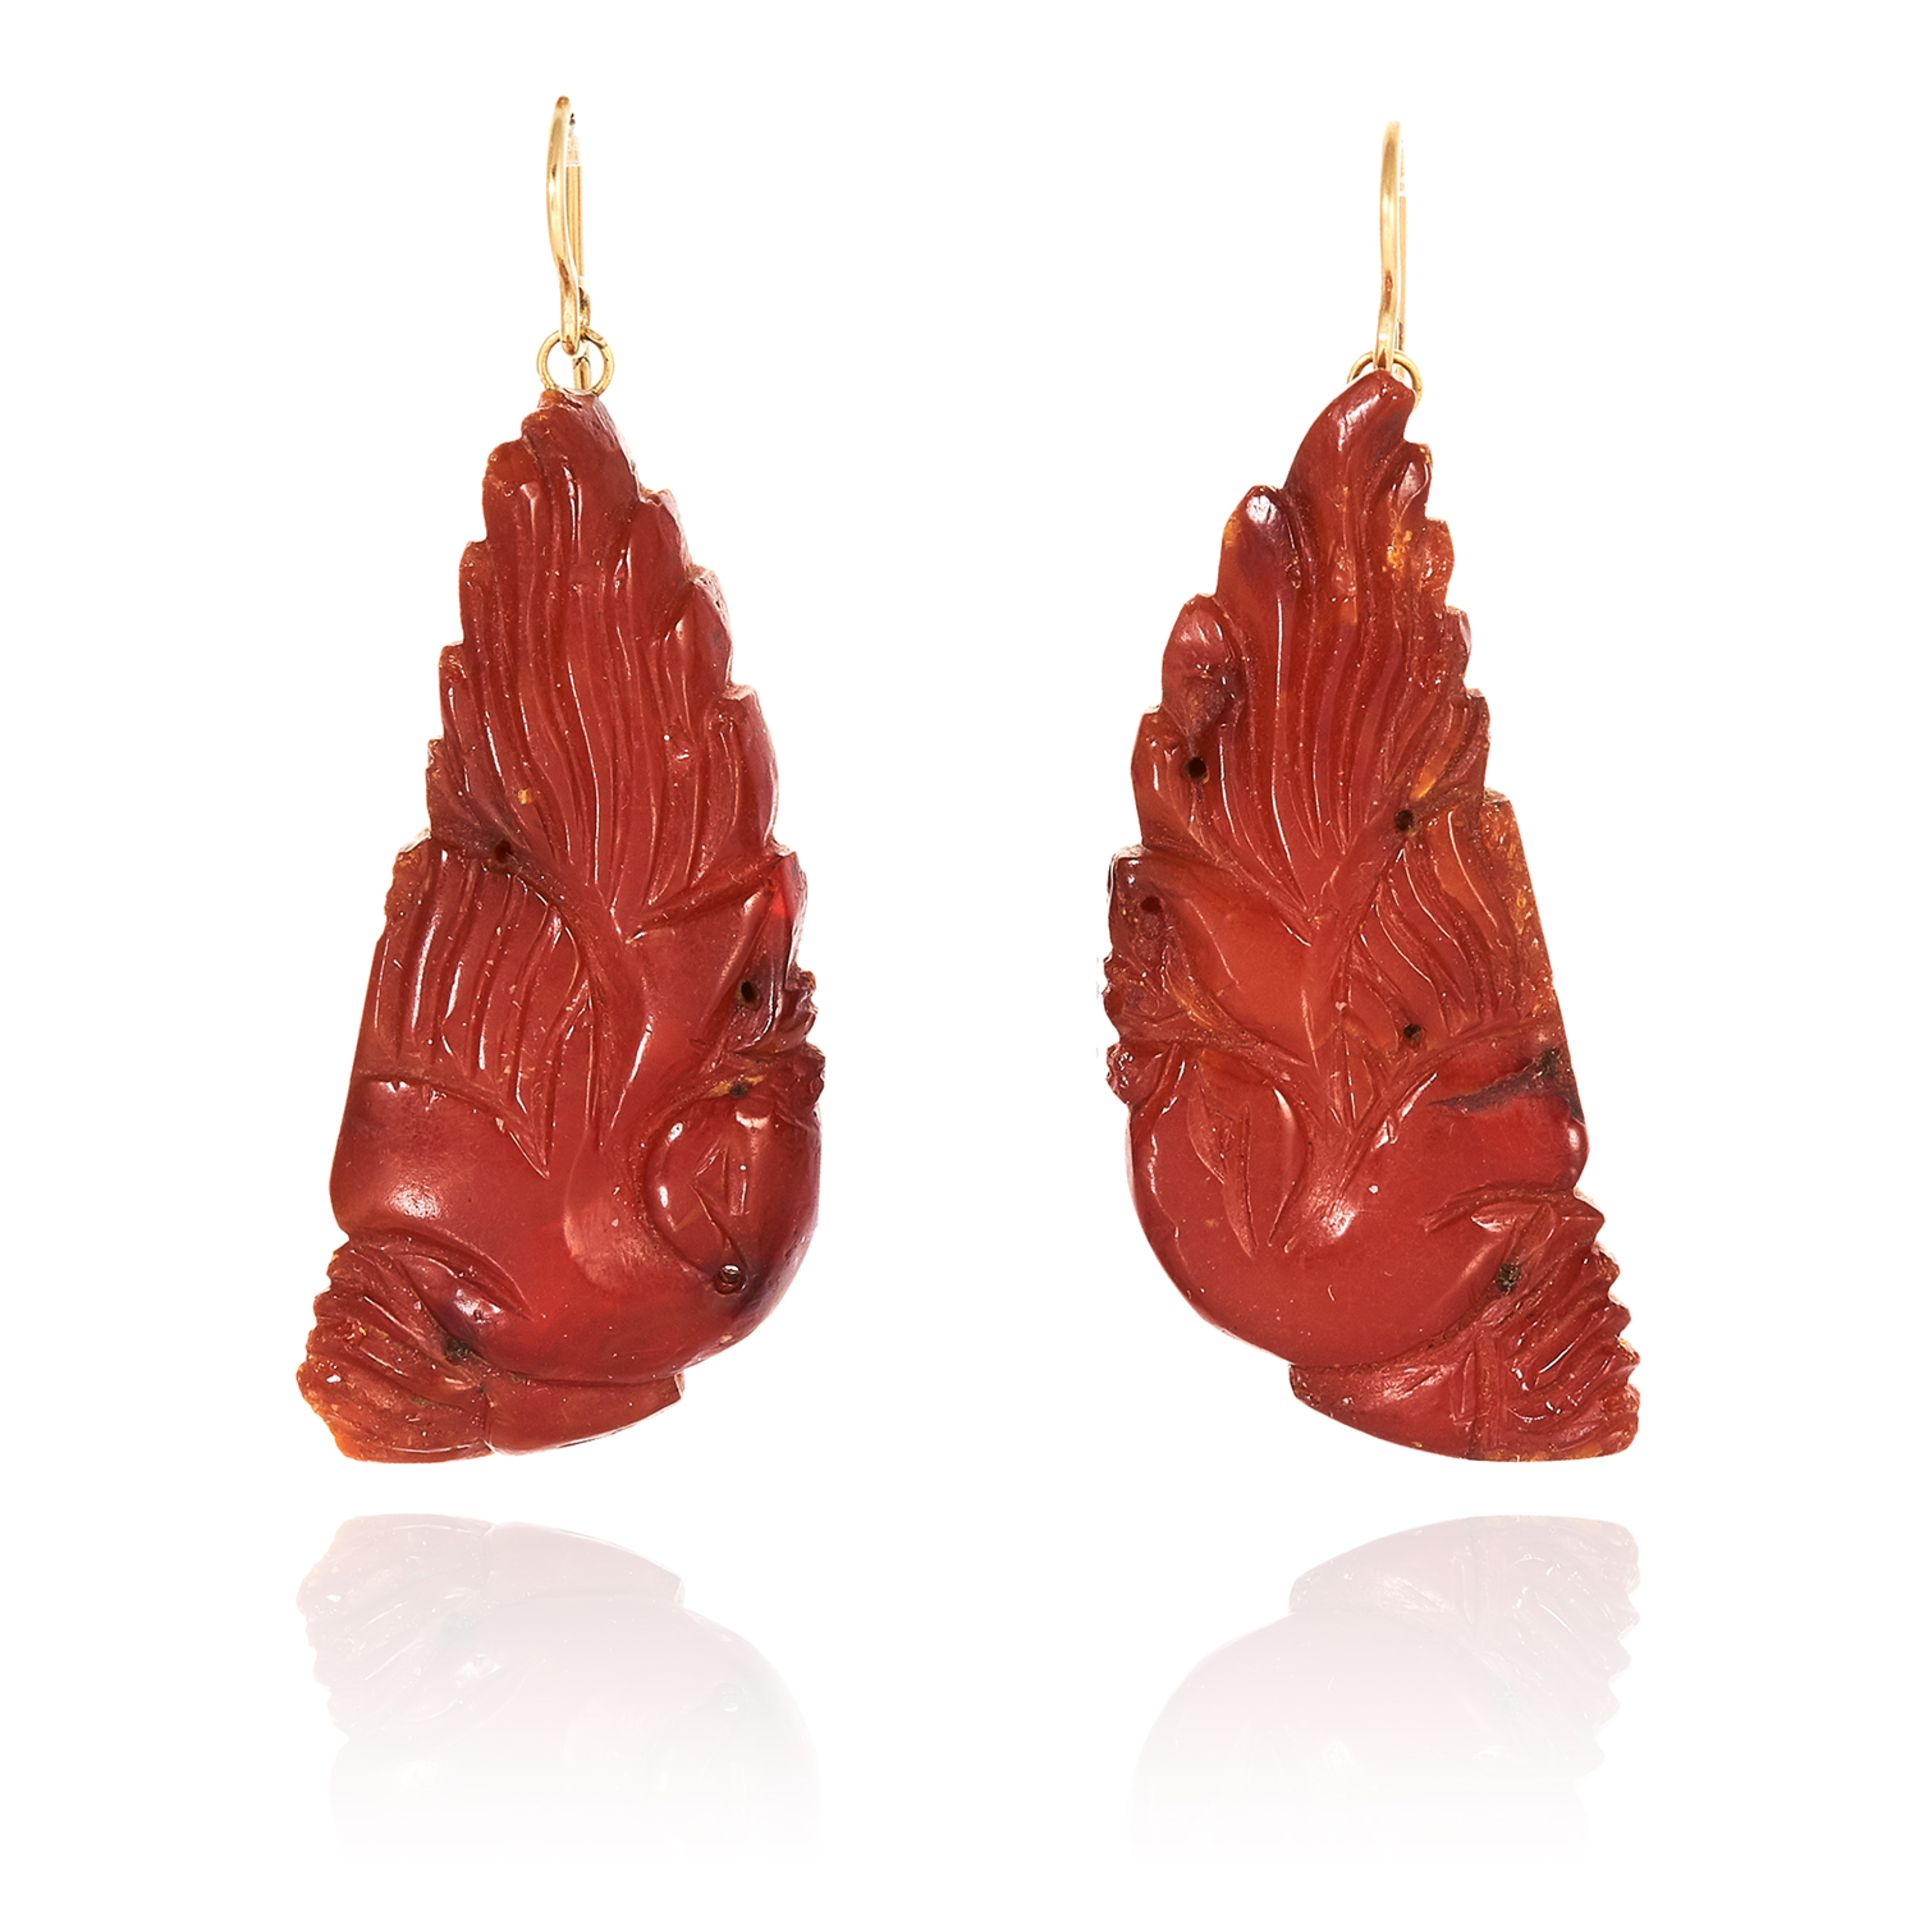 A PAIR OF ANTIQUE CHINESE AMBER EARRINGS, MING DYNSATY suspended from hooks, 17th Century, 5.7cm,